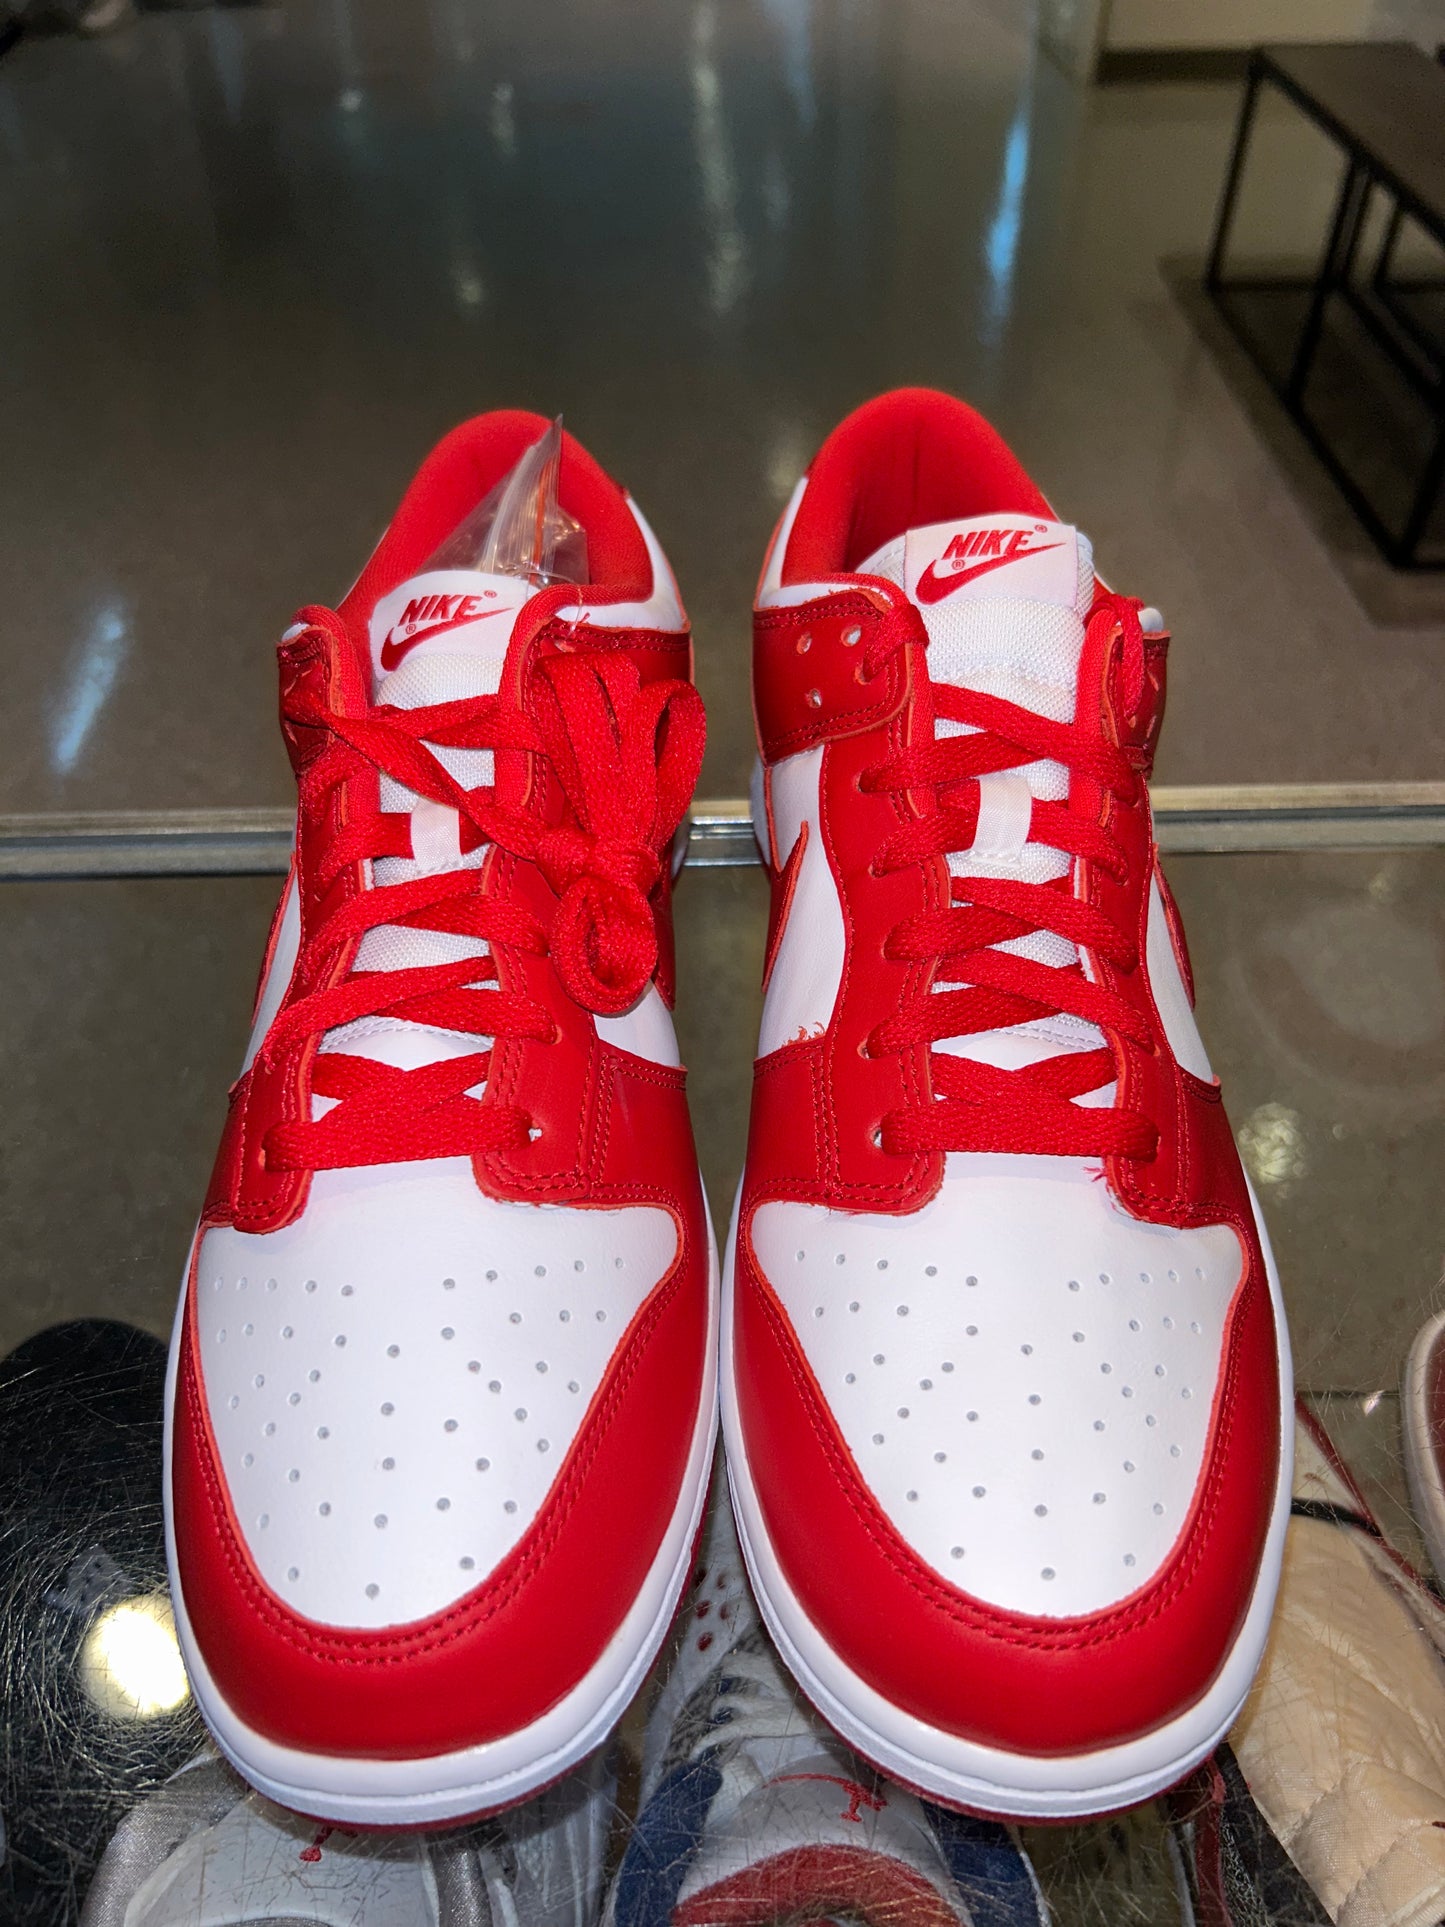 Size 11 Dunk Low SP “St Johns” Brand New (Mall)